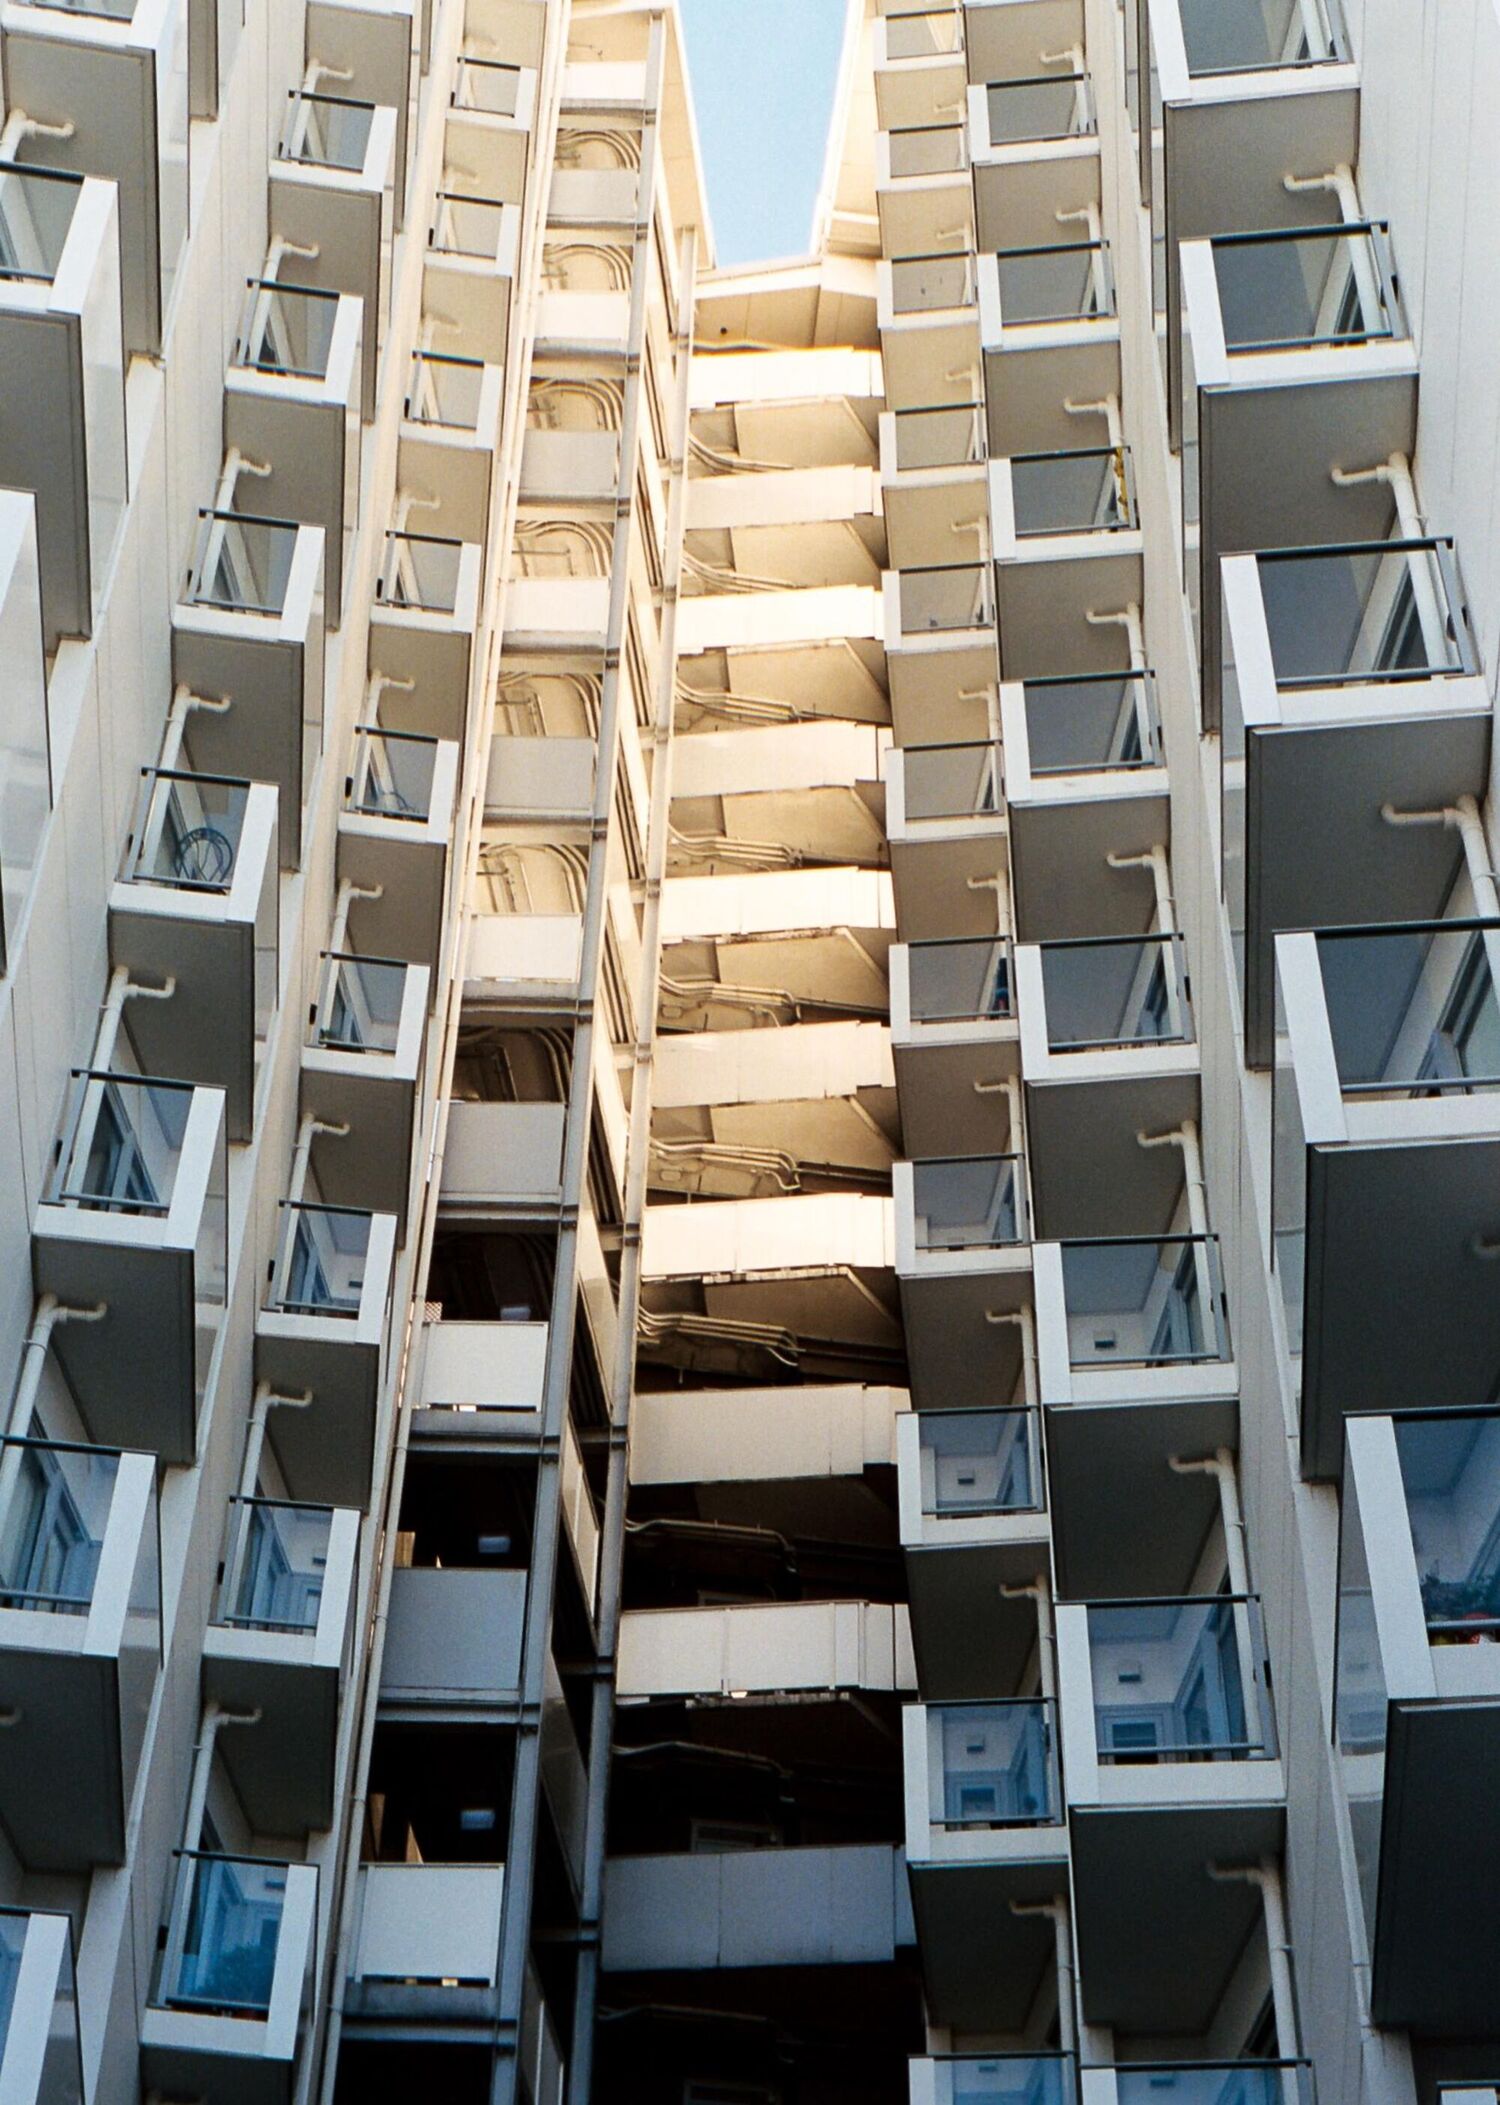 Some very repetitive looking apartments in Wellington